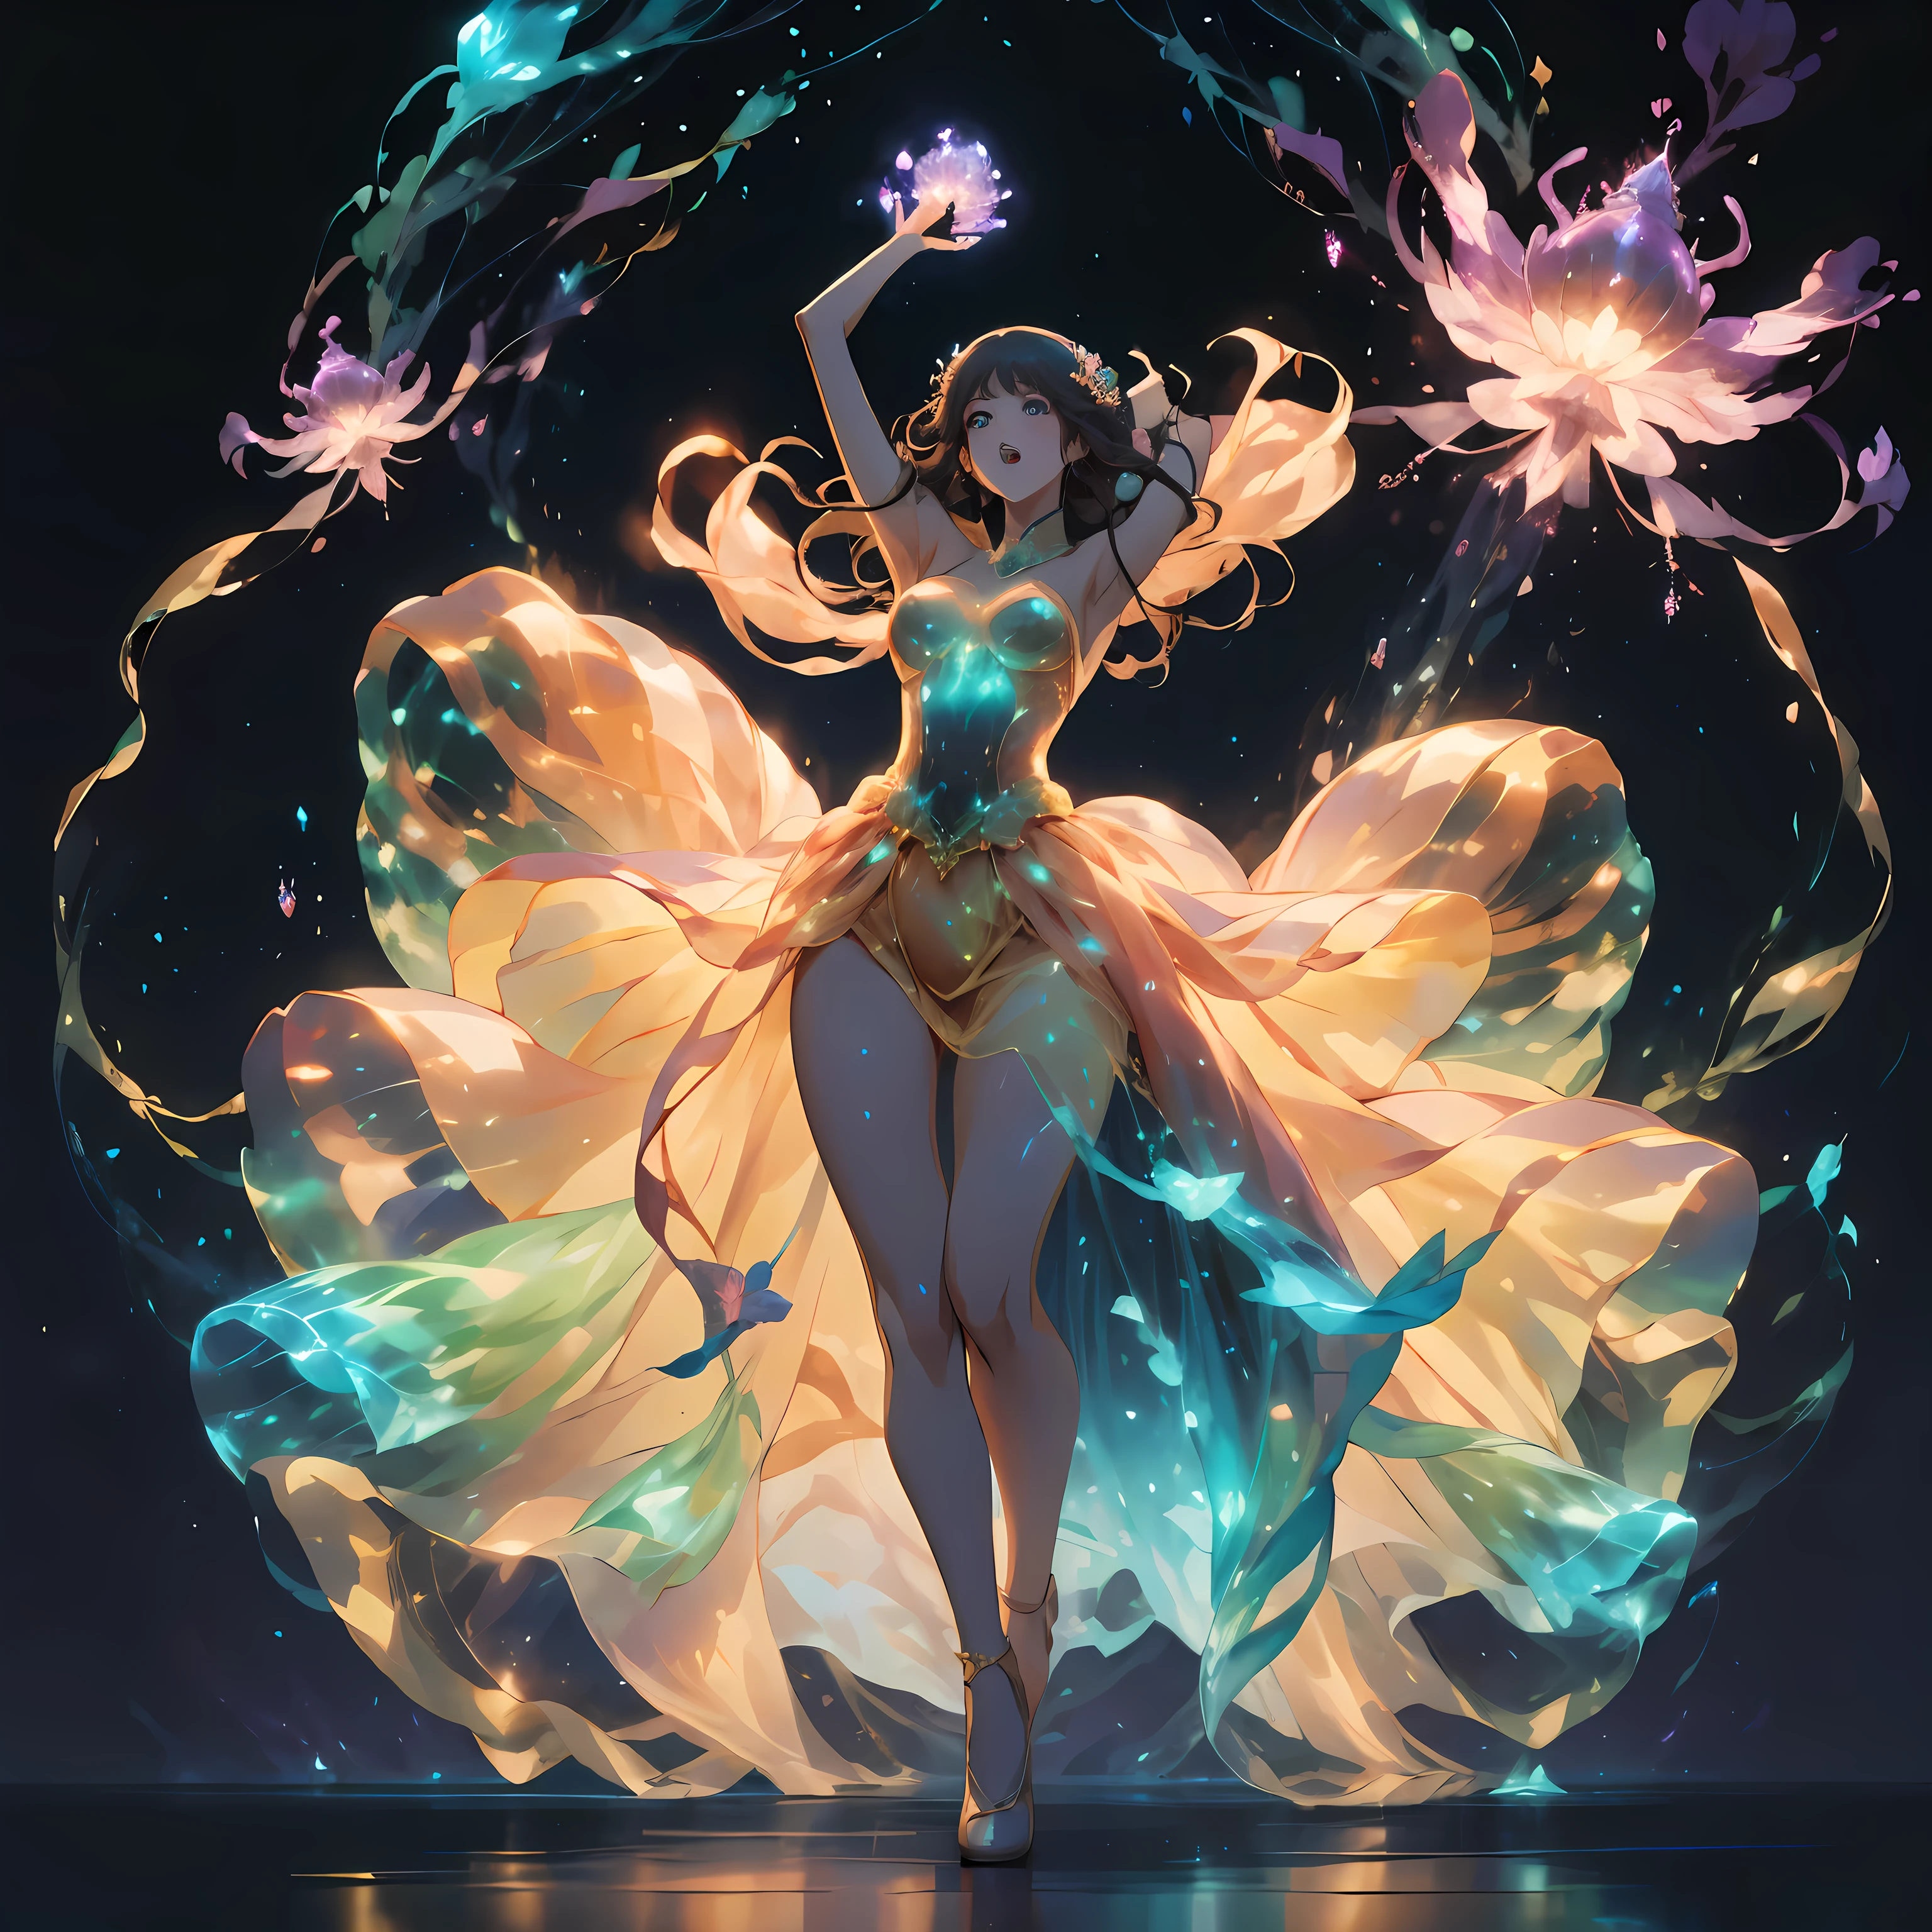 dancing princess, flowers, glowing outfit, dark background, bioluminescent plants, fantasy world, crown, crystals, detailed face, open mouth, blue eyes